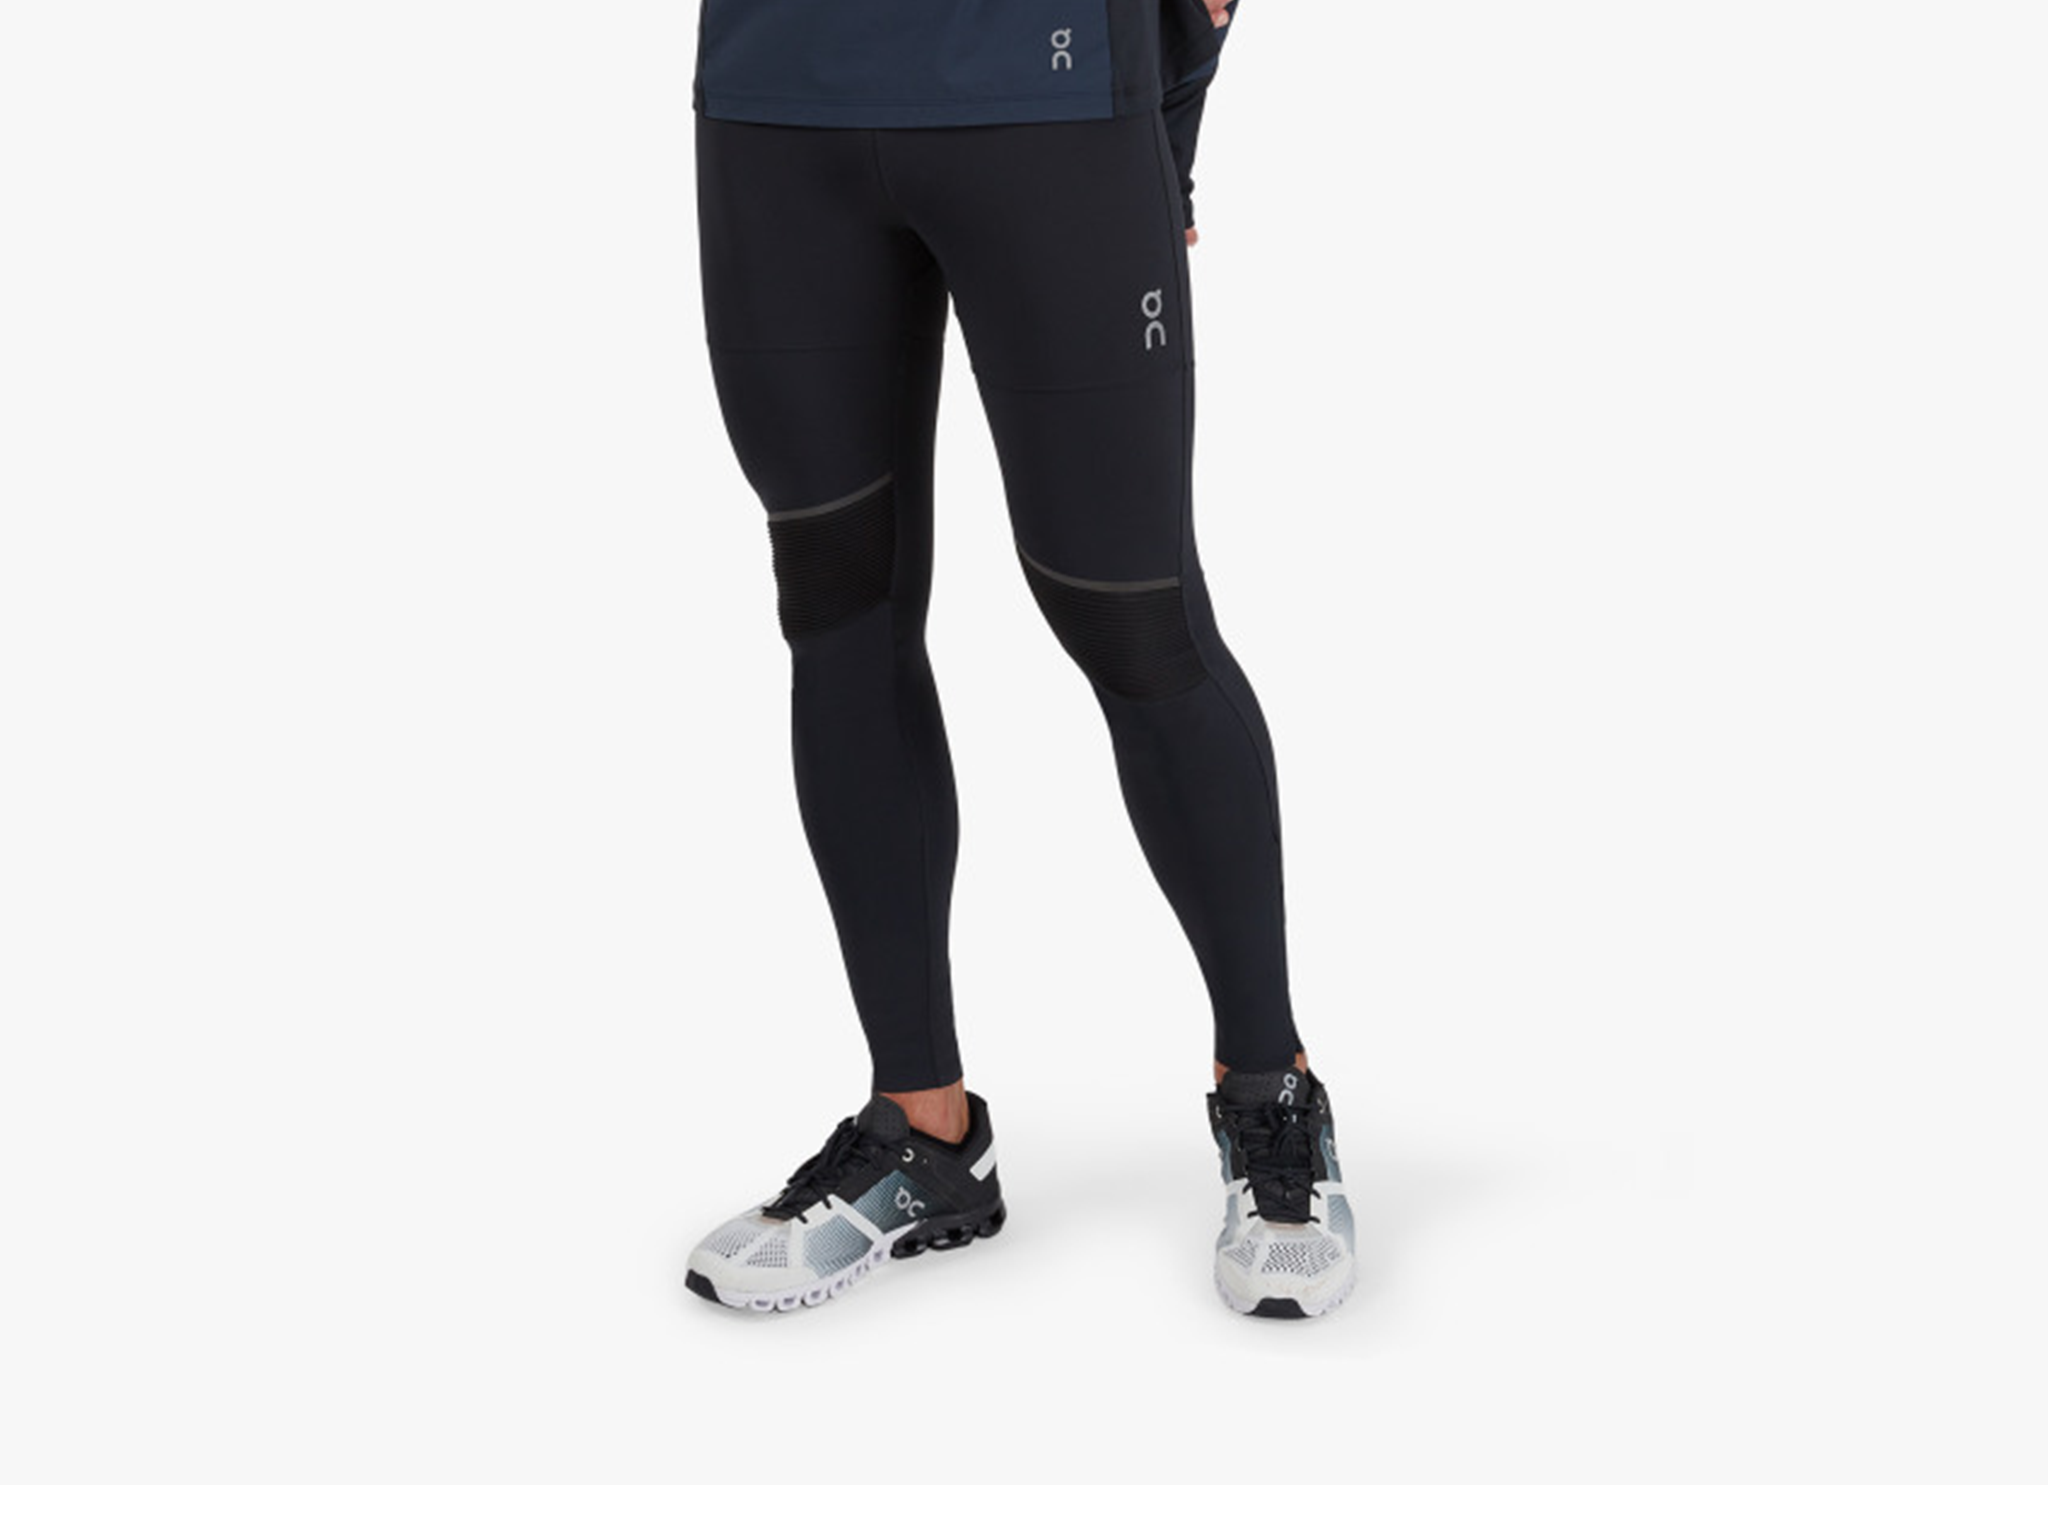 10 Women's Winter Running Tights to Survive the Cold (2023)